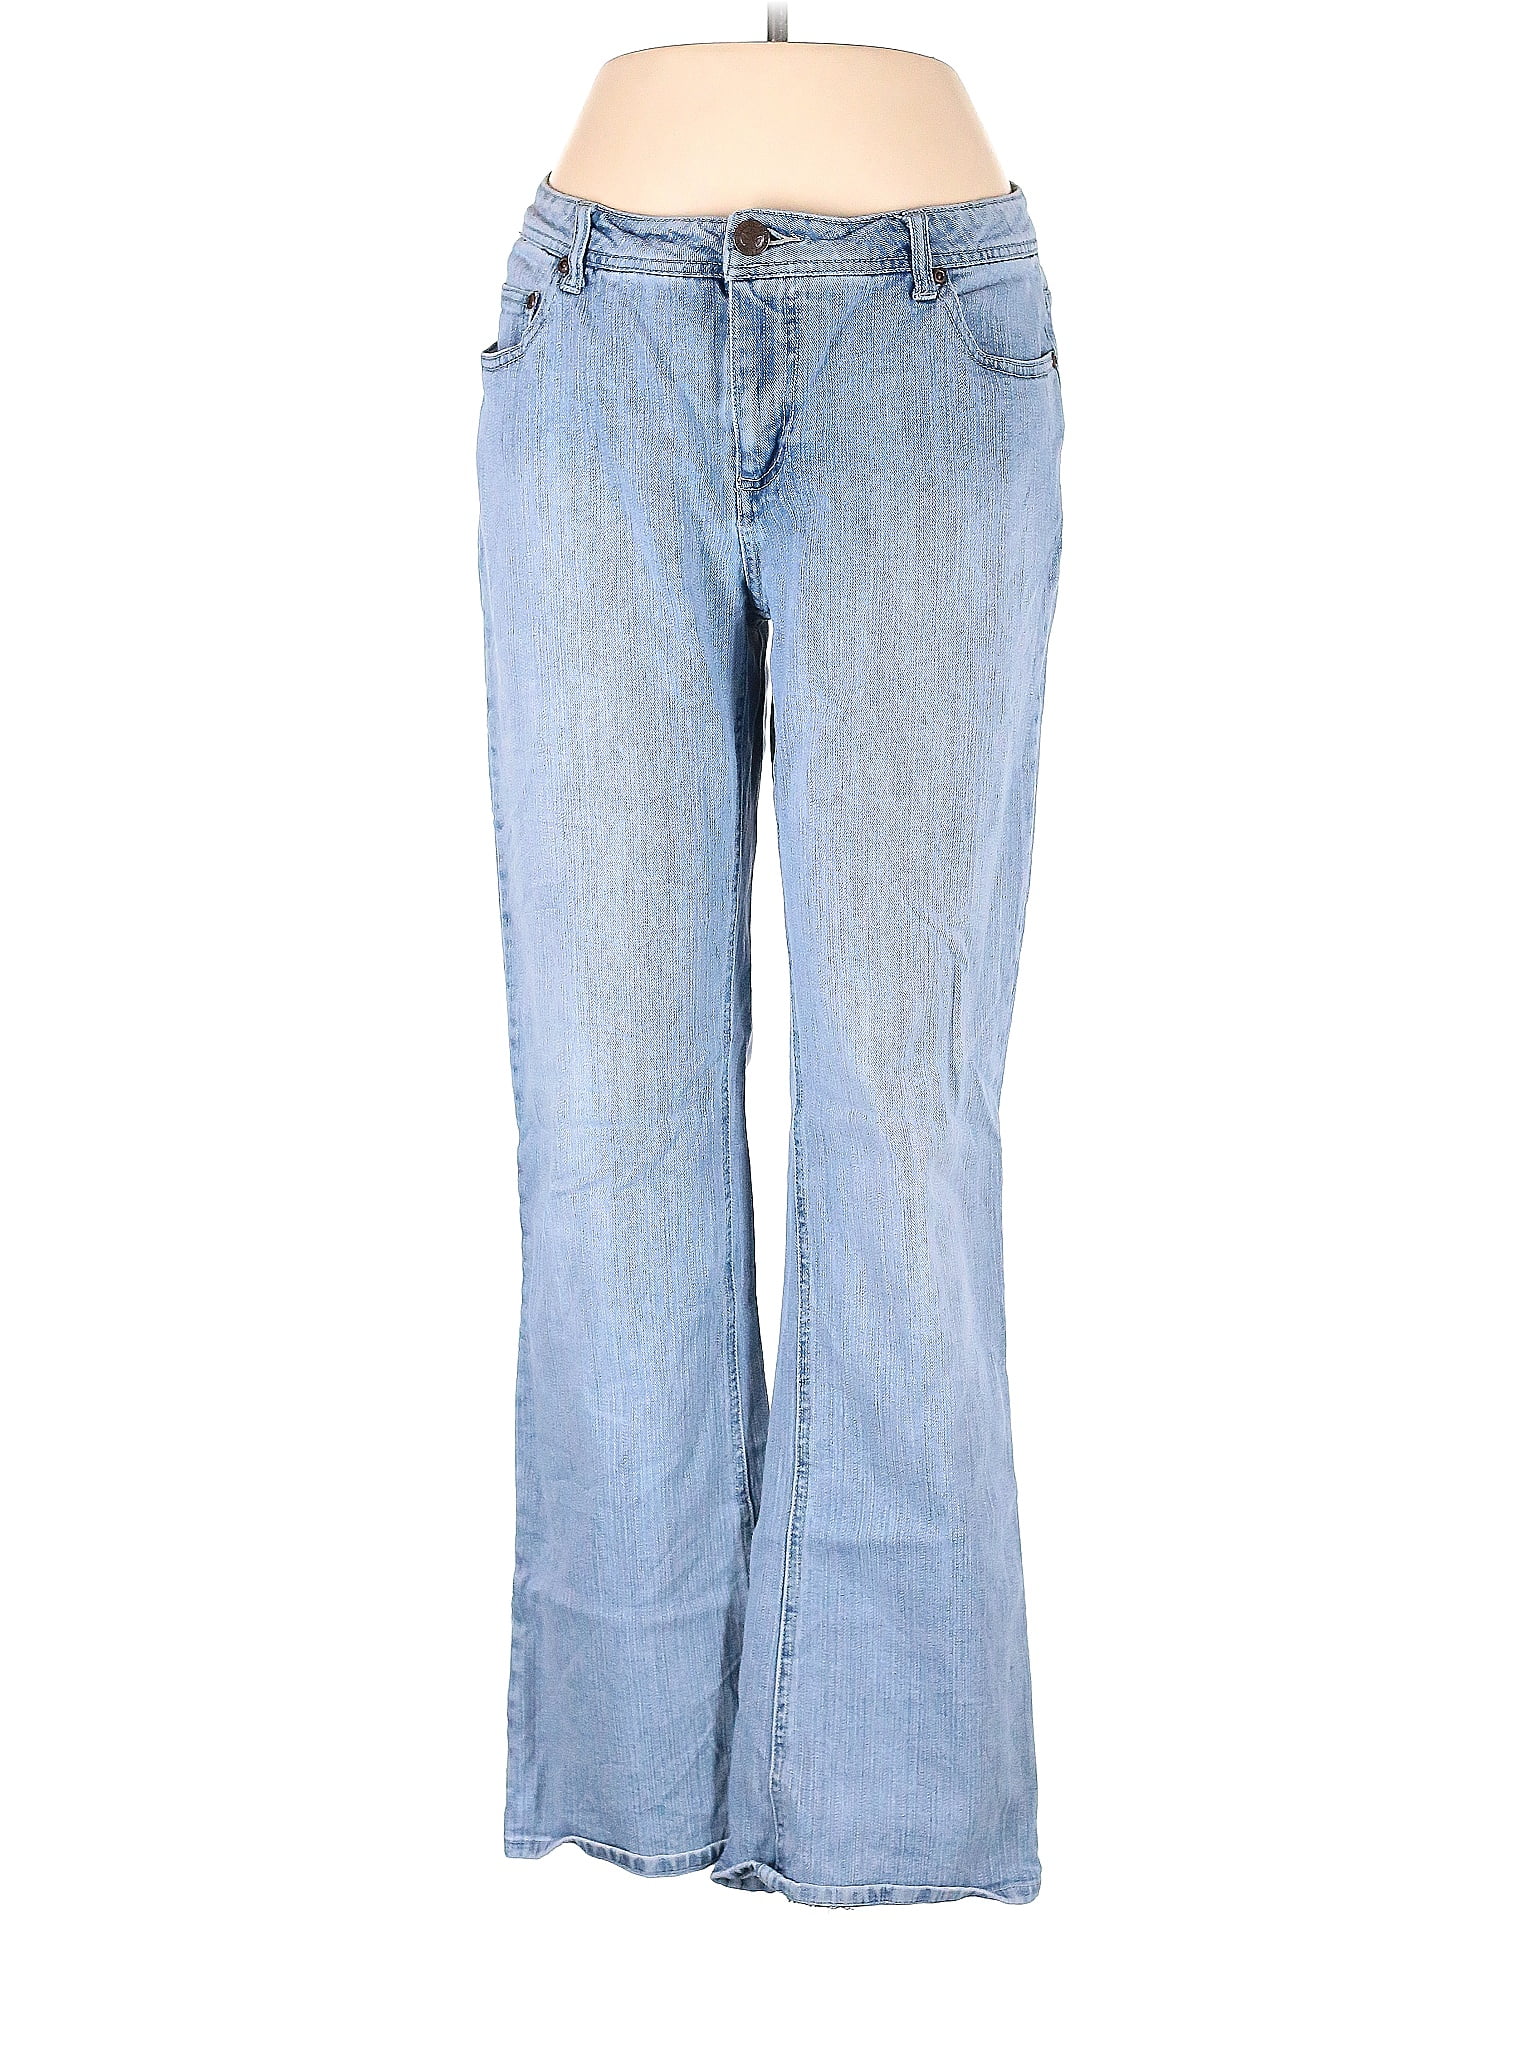 Faded Glory Solid Blue Jeans Size 16 - 56% off